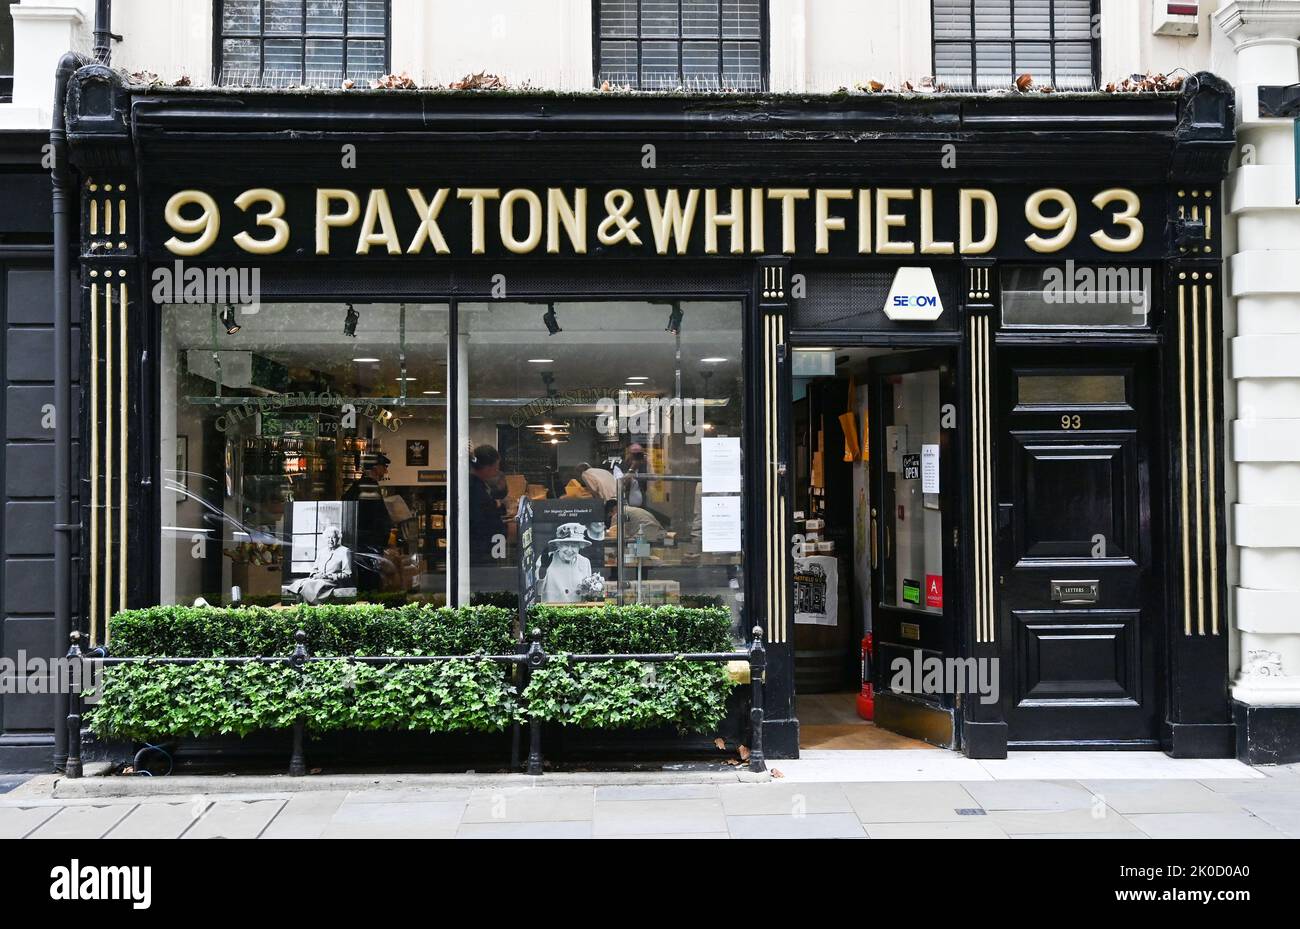 London UK 10th September 2022 - Paxton & Whitfield in  cheese shop in Jermyn Street with tributes in the window after The Queen Elizabeth II died at the age of 96 on Thursday 8th September 2022   Photograph taken by Simon Dack Stock Photo